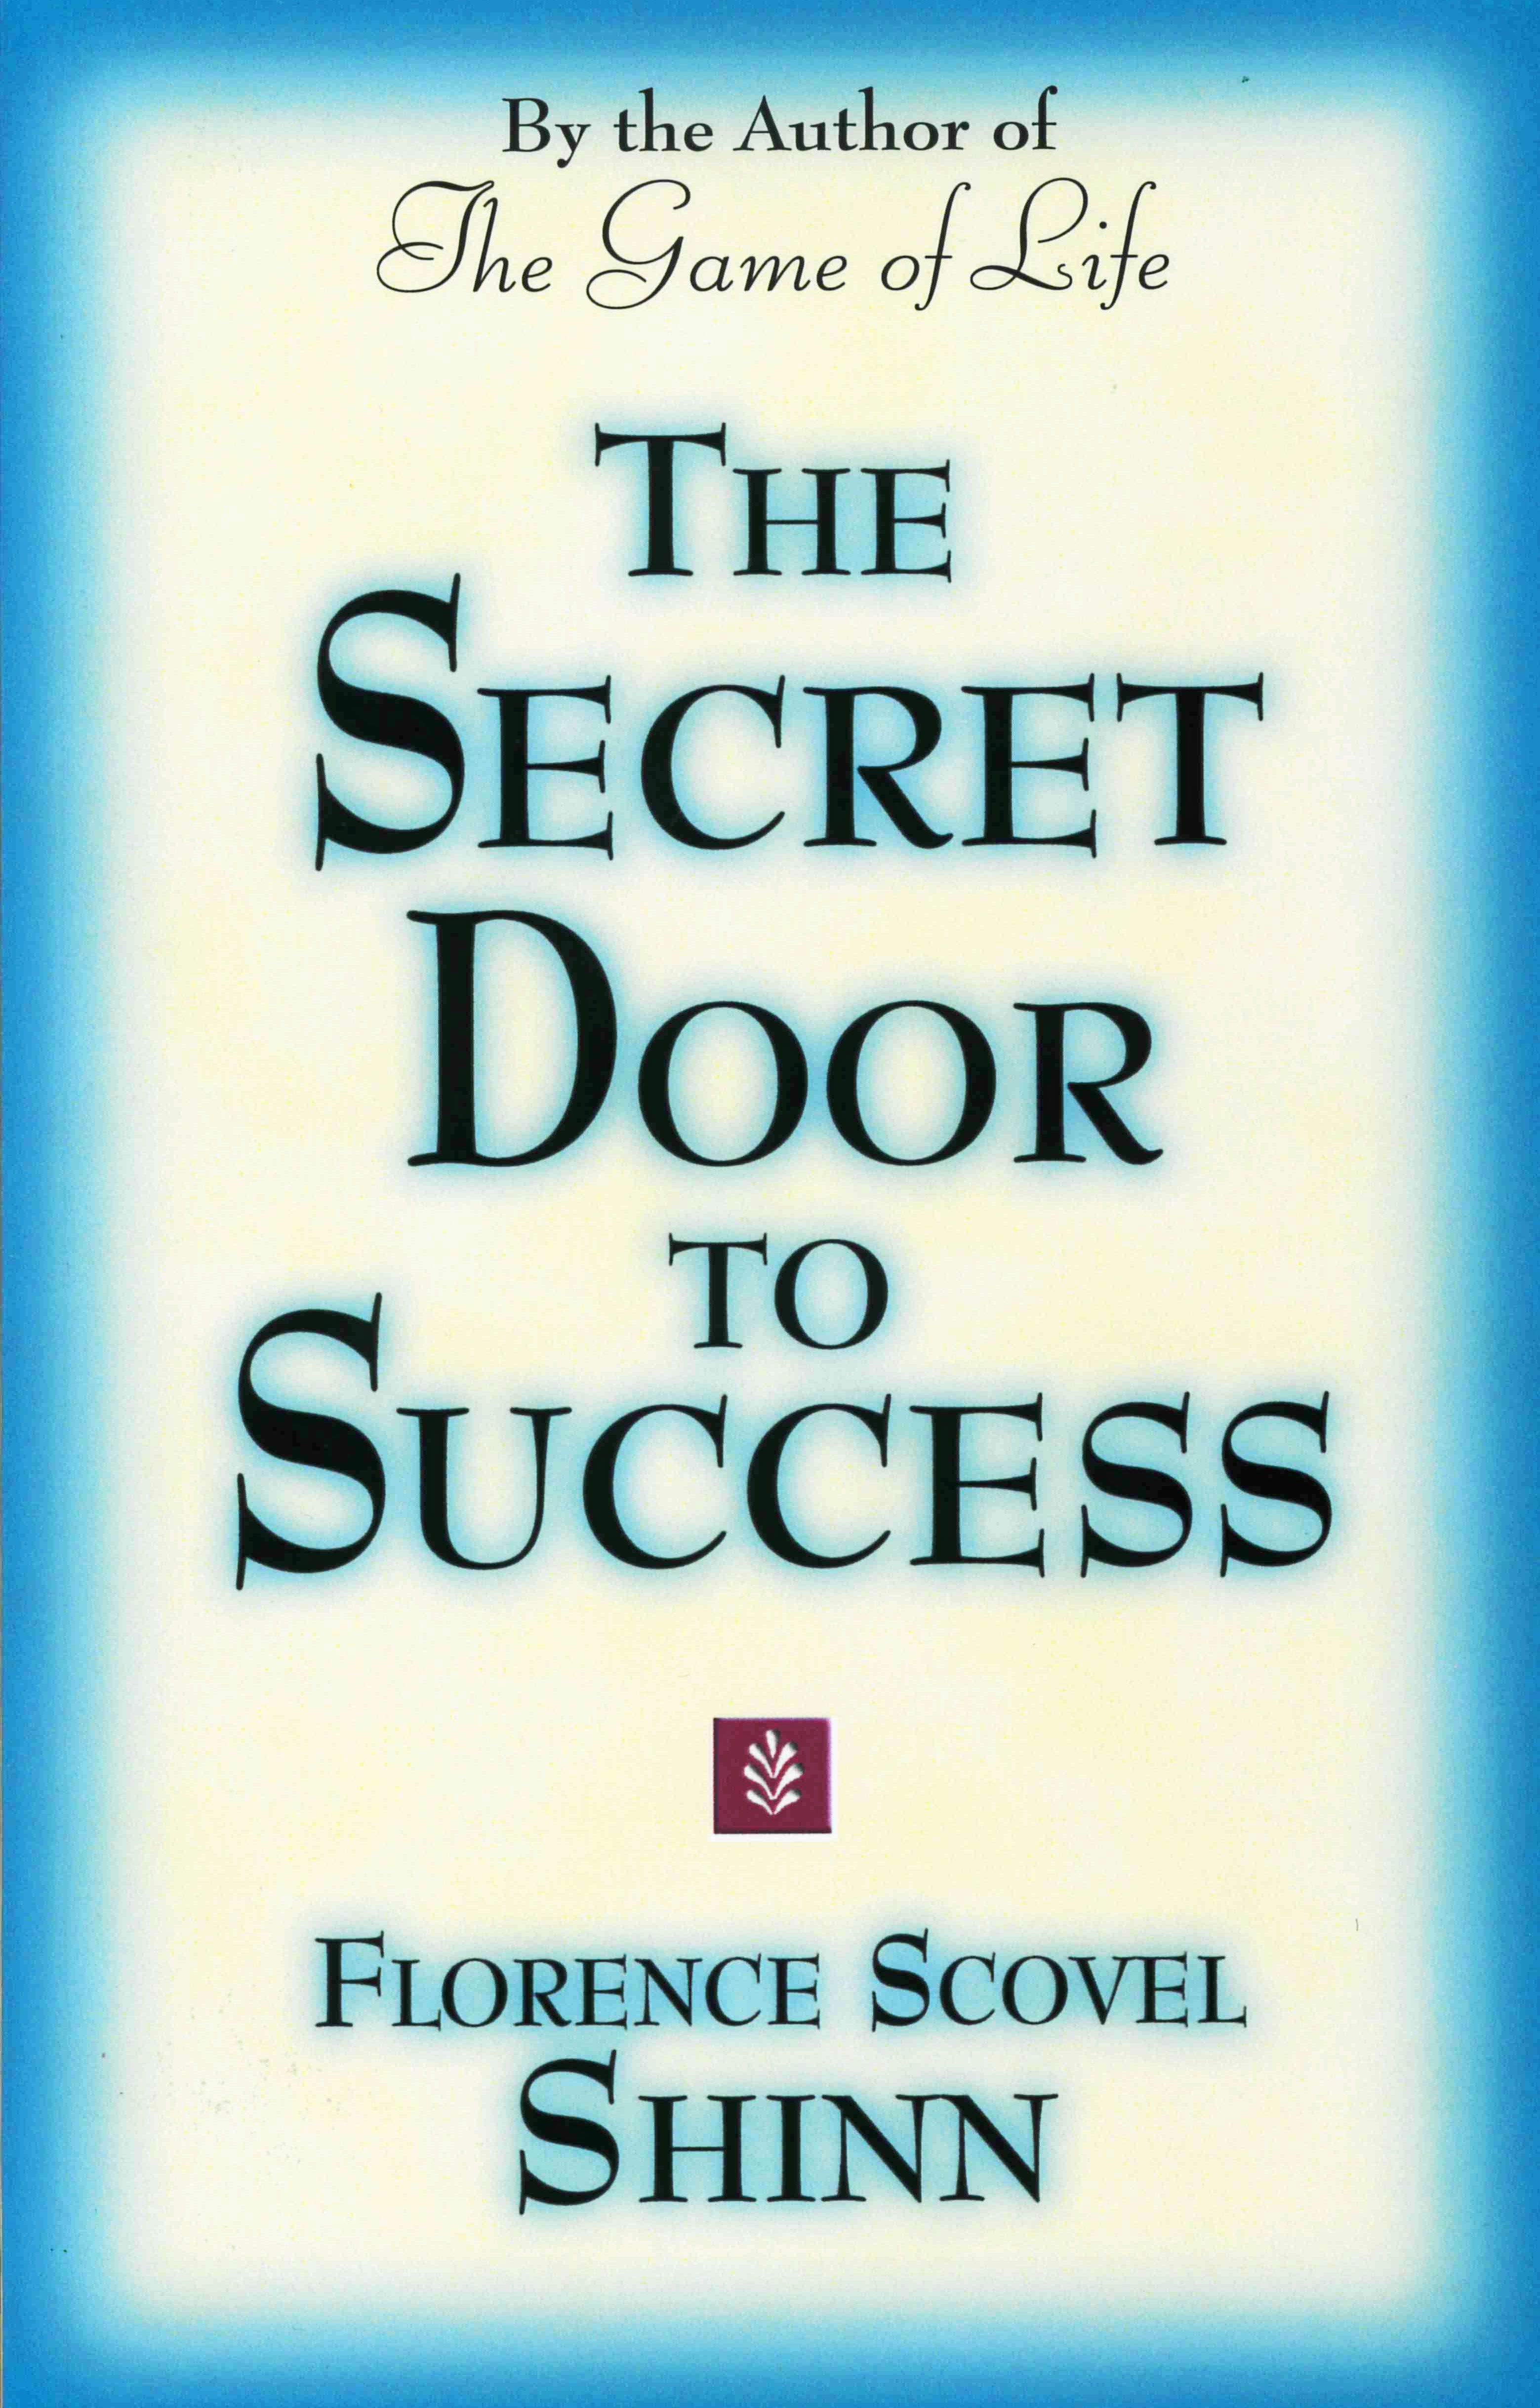 The Secret Door to Success: By the Author of the Game of Life - Shinn, Florence Scovel